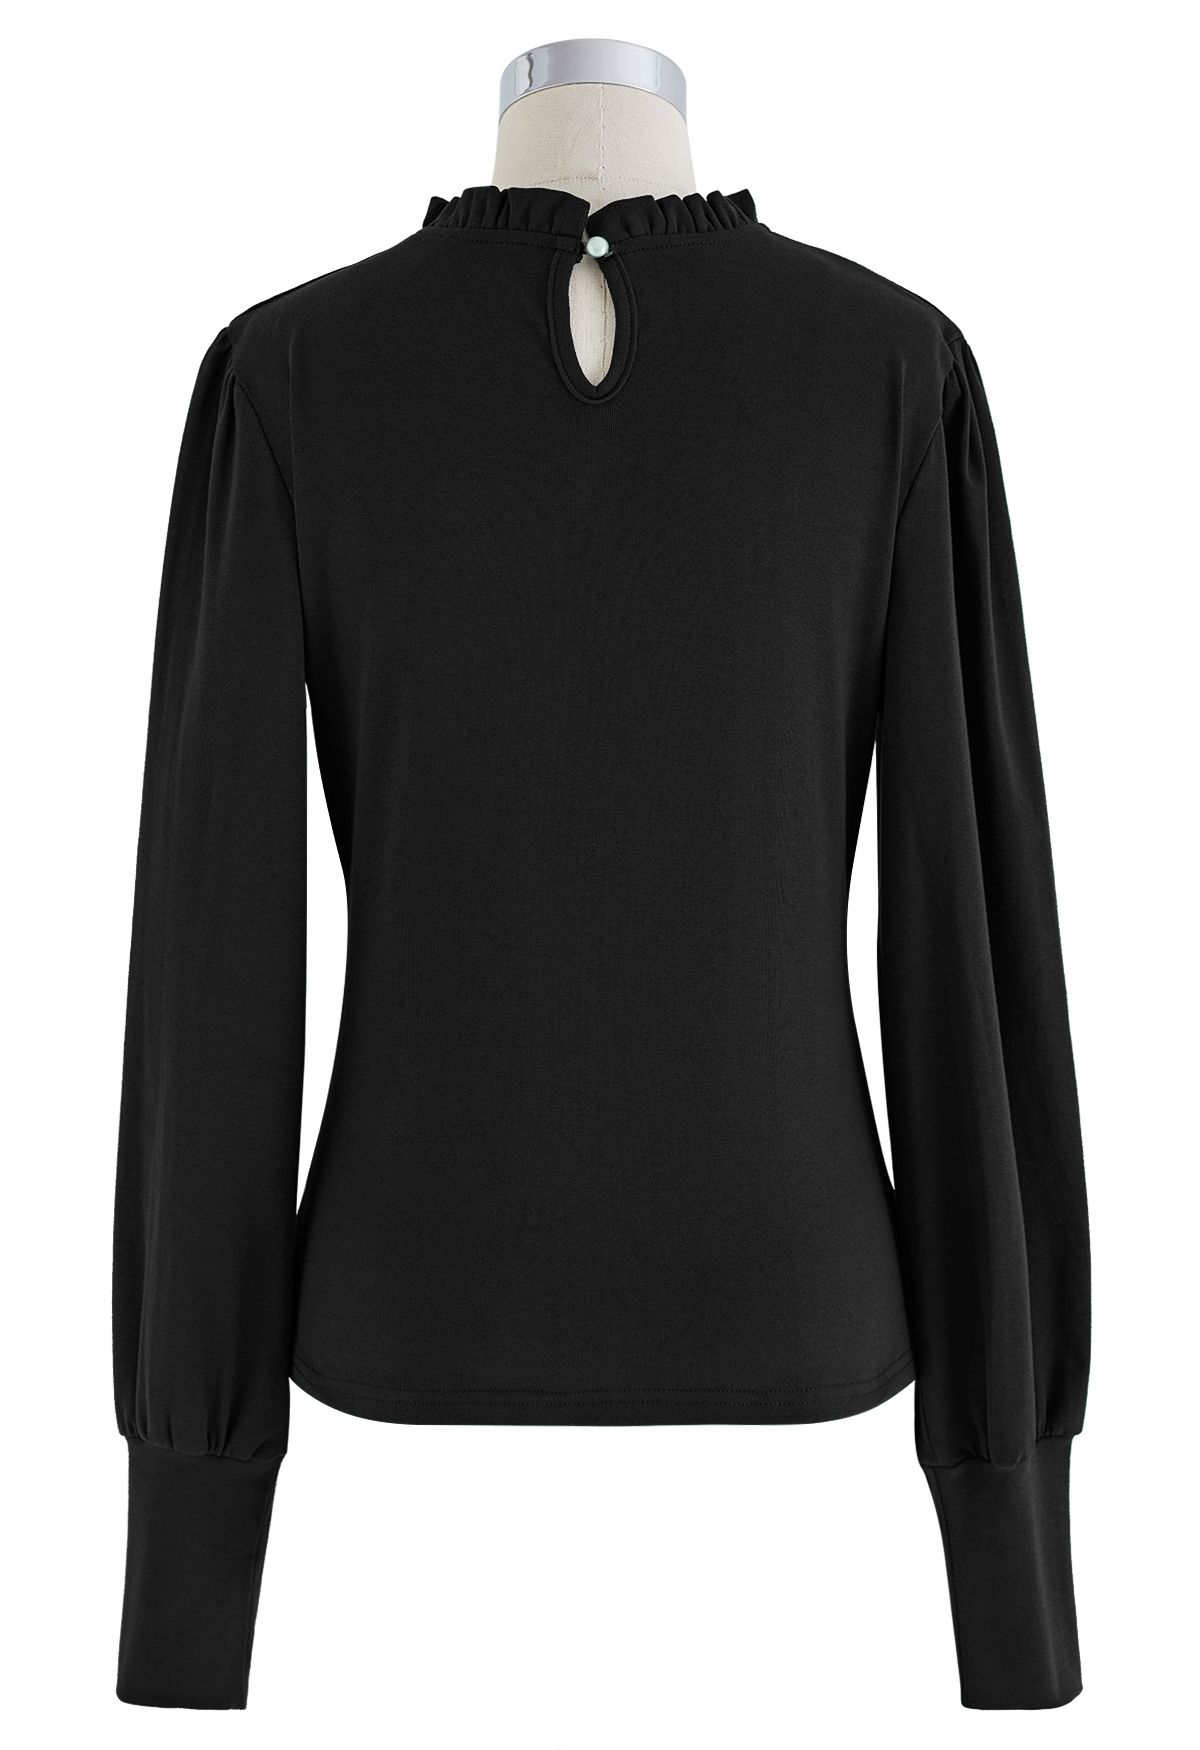 Ruched Front Ruffle Neck Fitted Top in Black